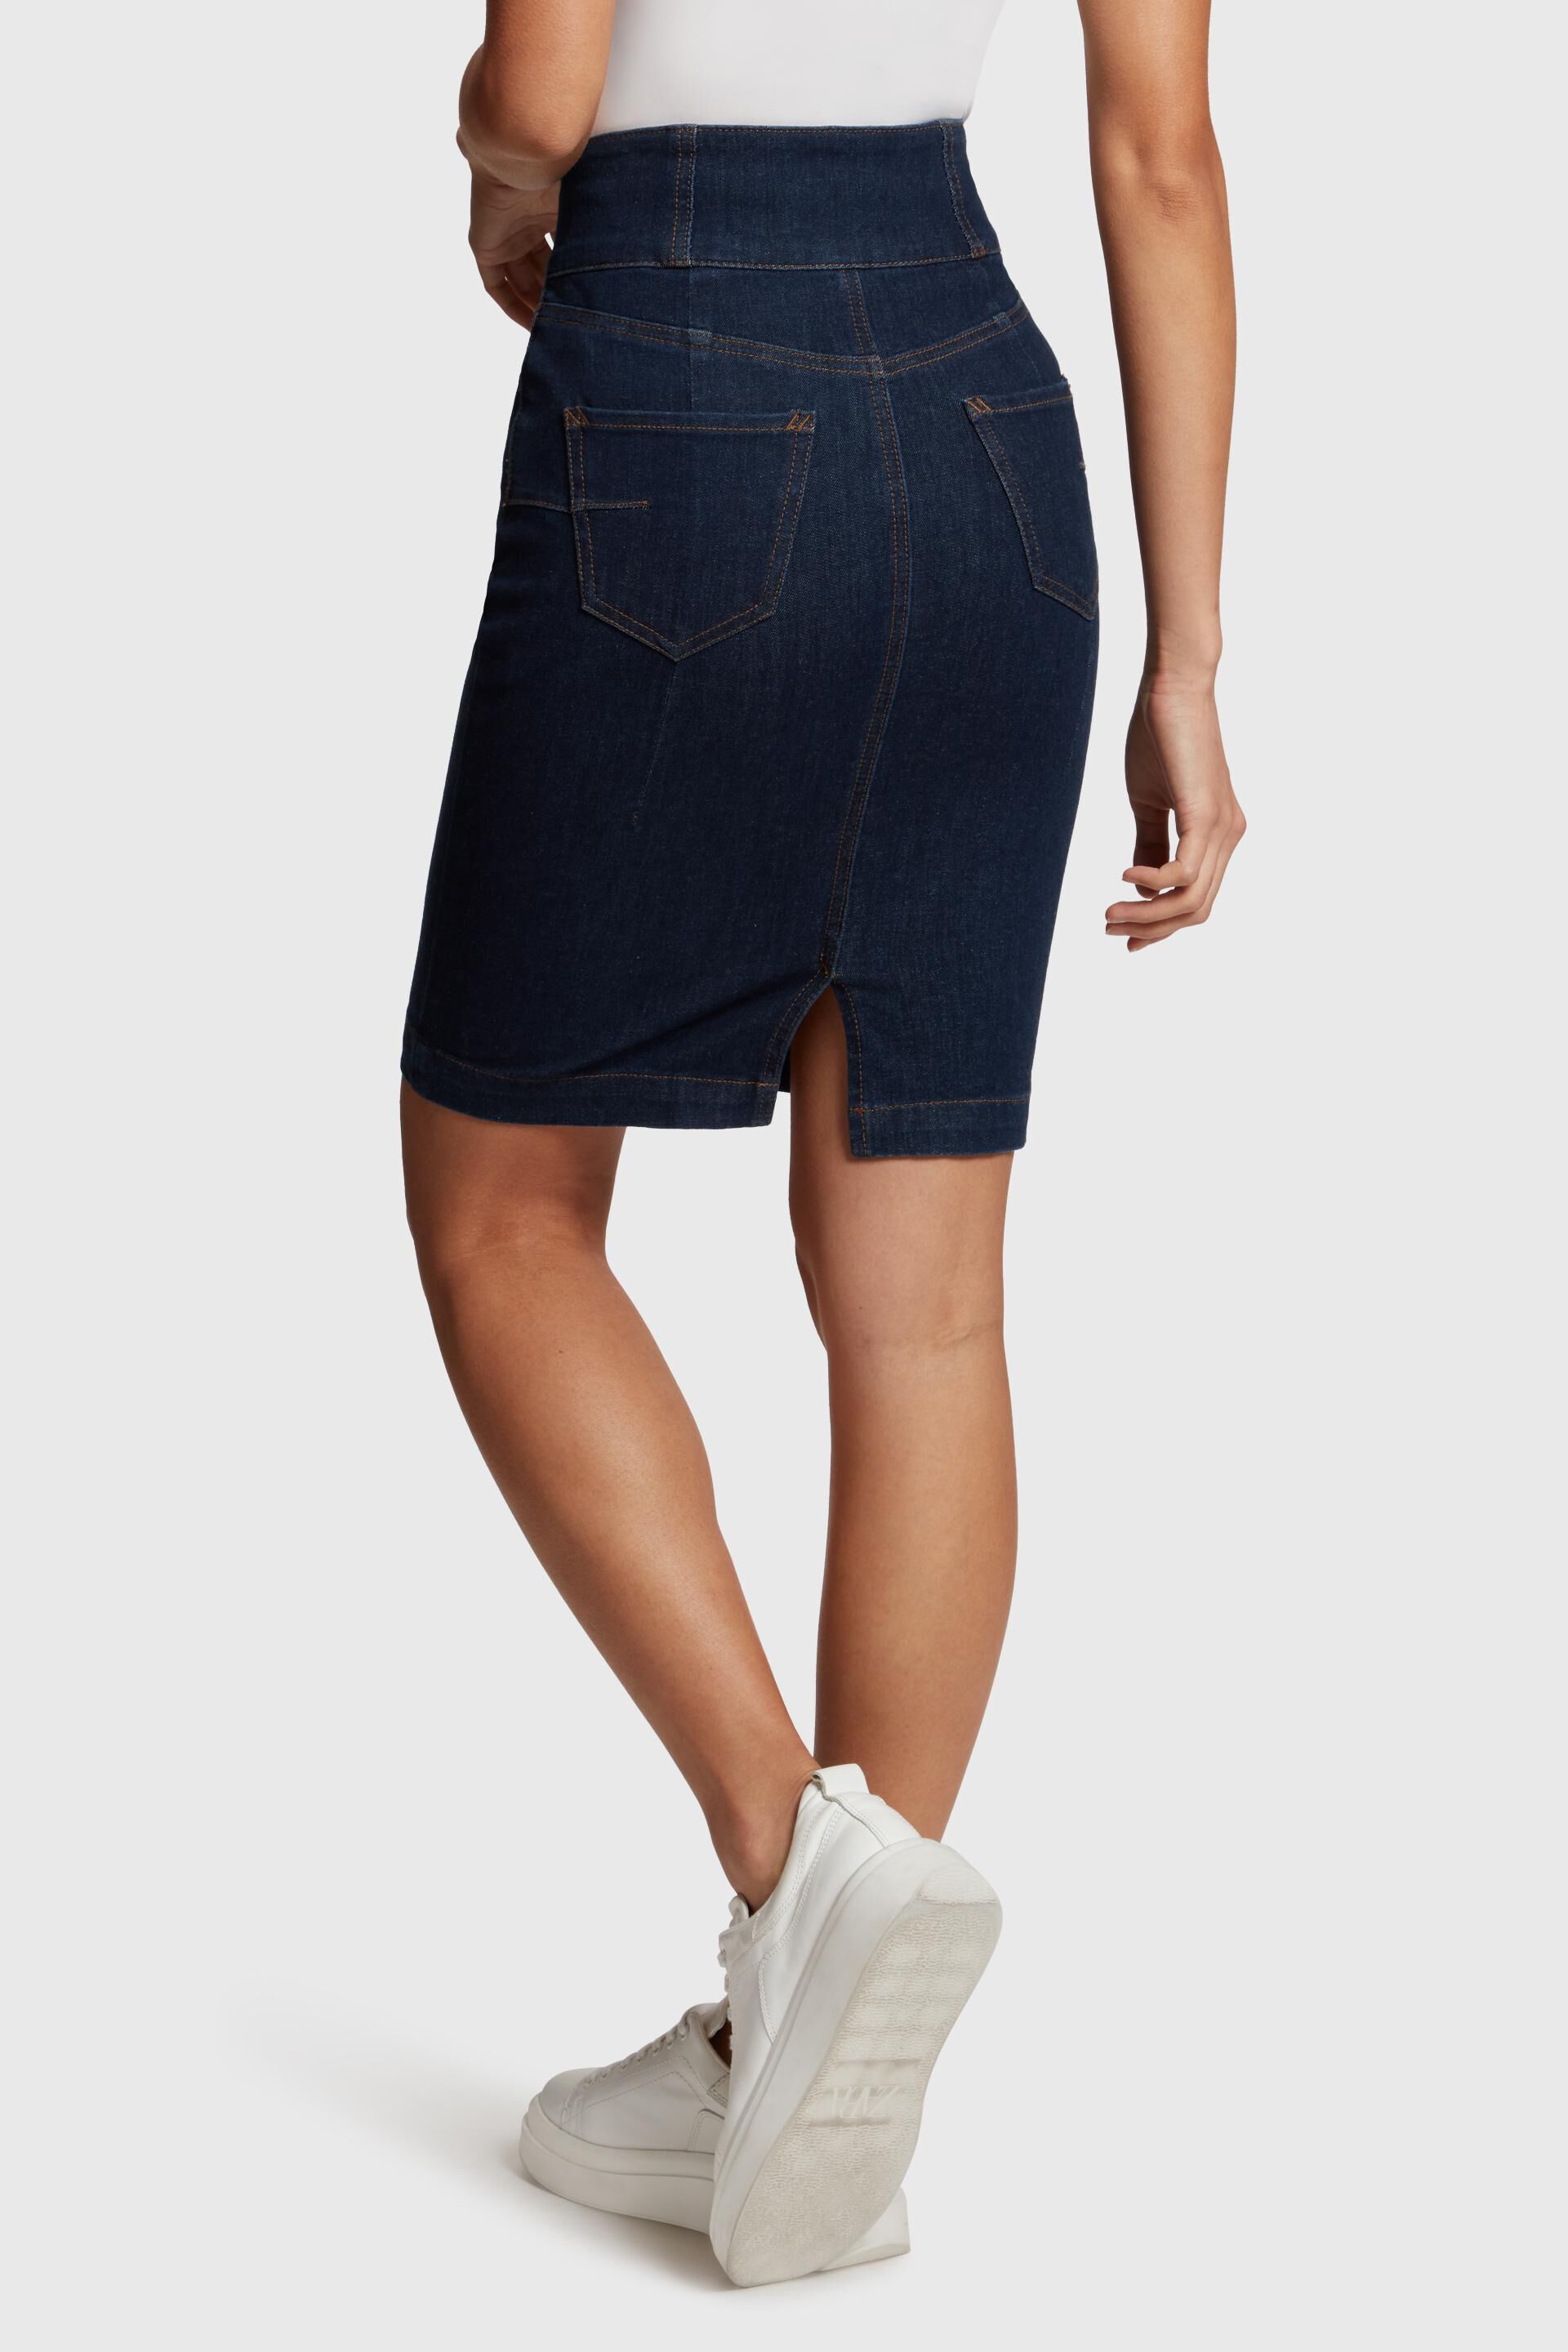 The Best Denim Pencil Skirt for a Pear Shape Body - Lipgloss and Crayons